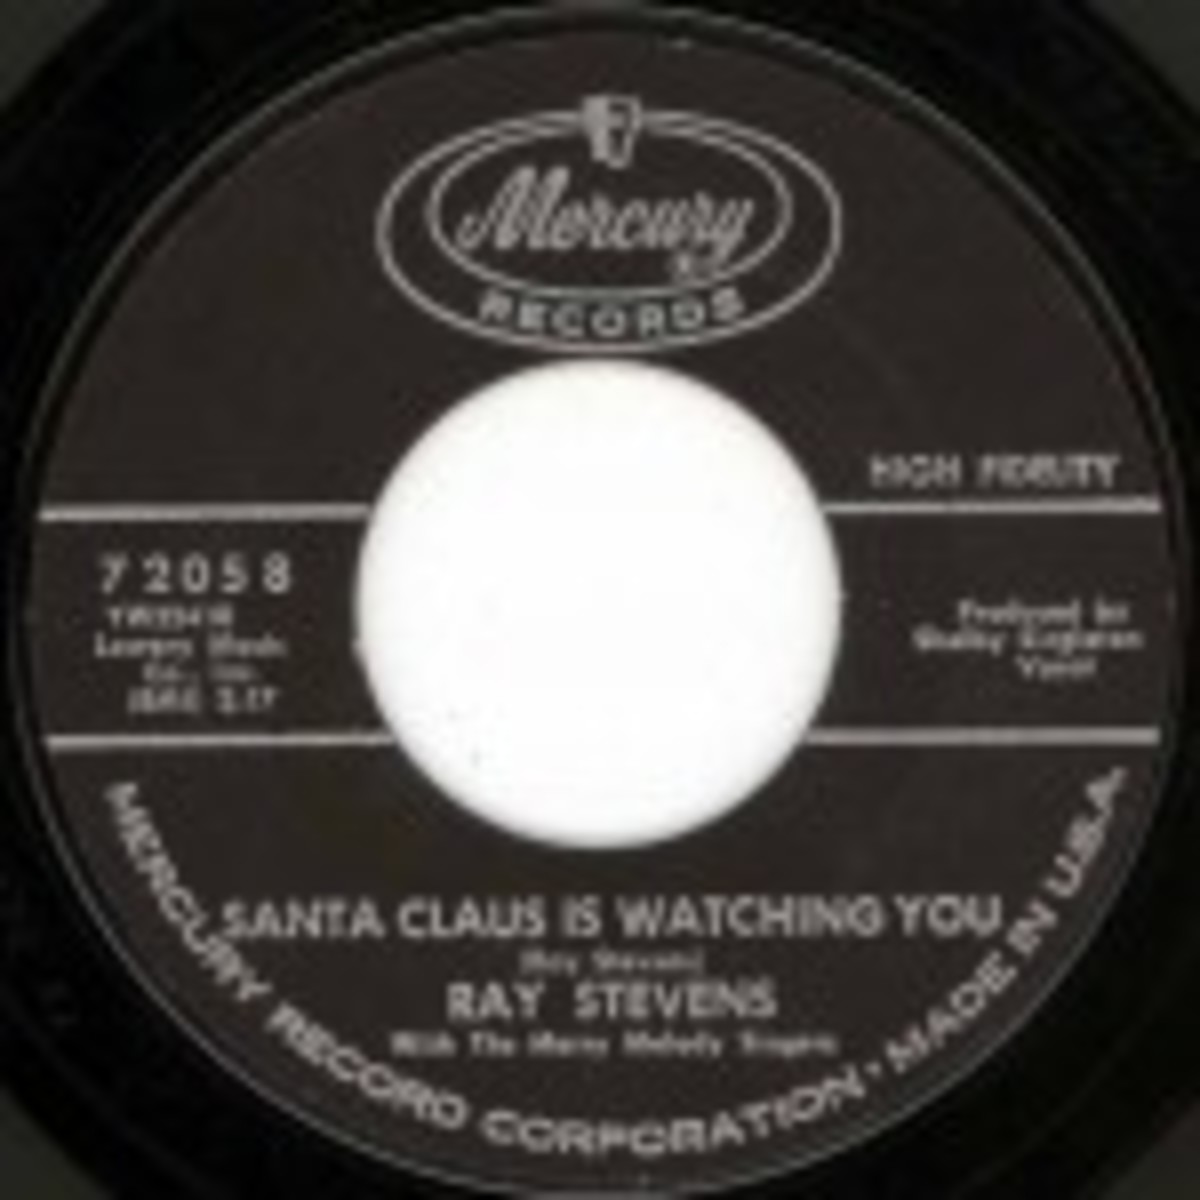 Ray Stevens Santa Claus Is Watching You